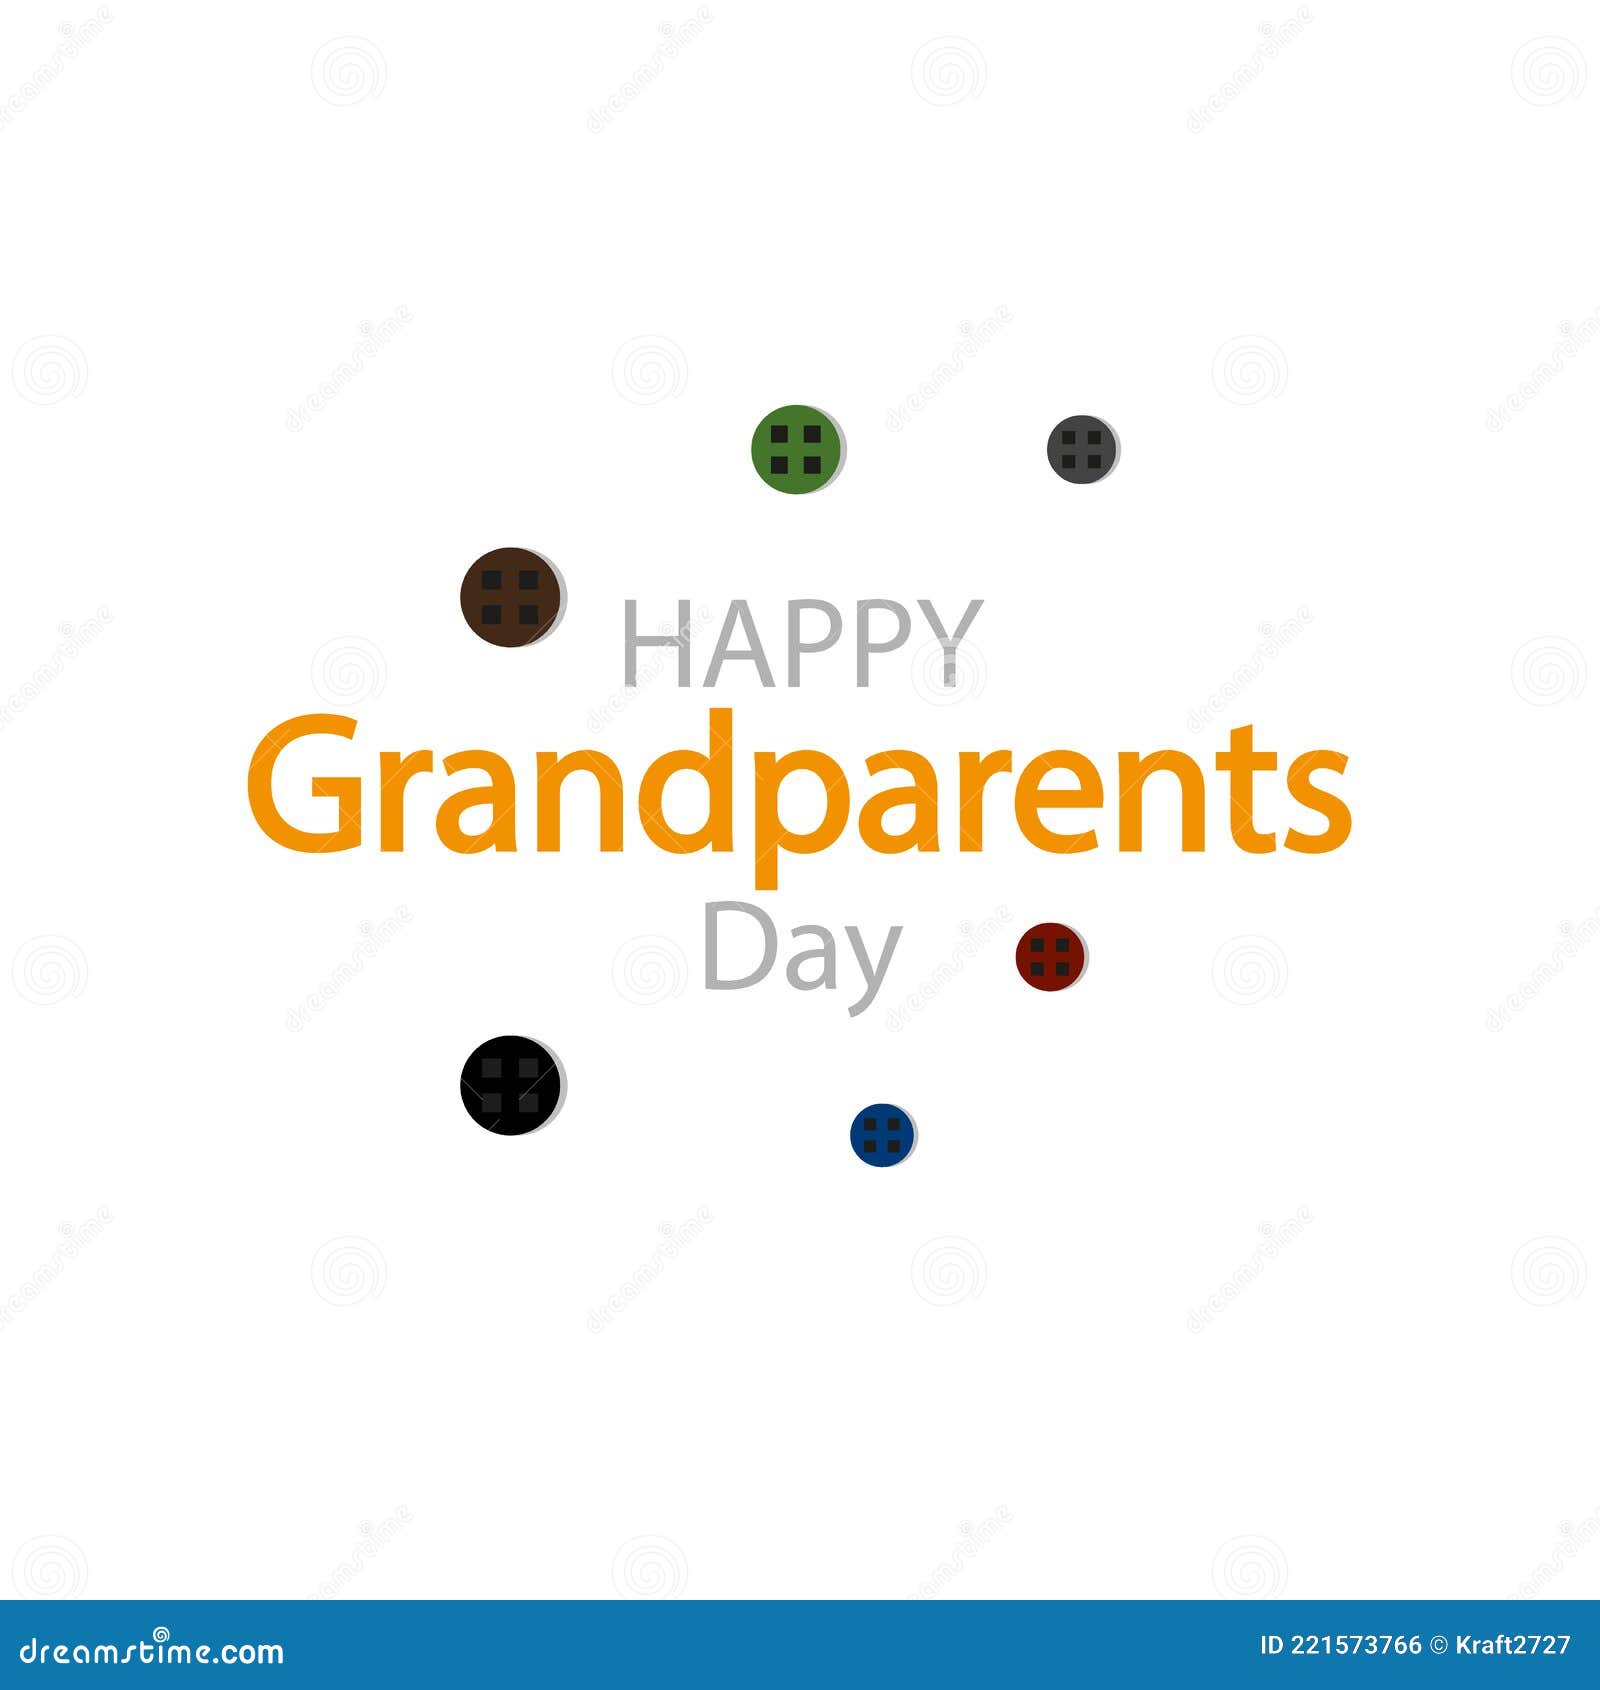 typography for grandparents day with buttons